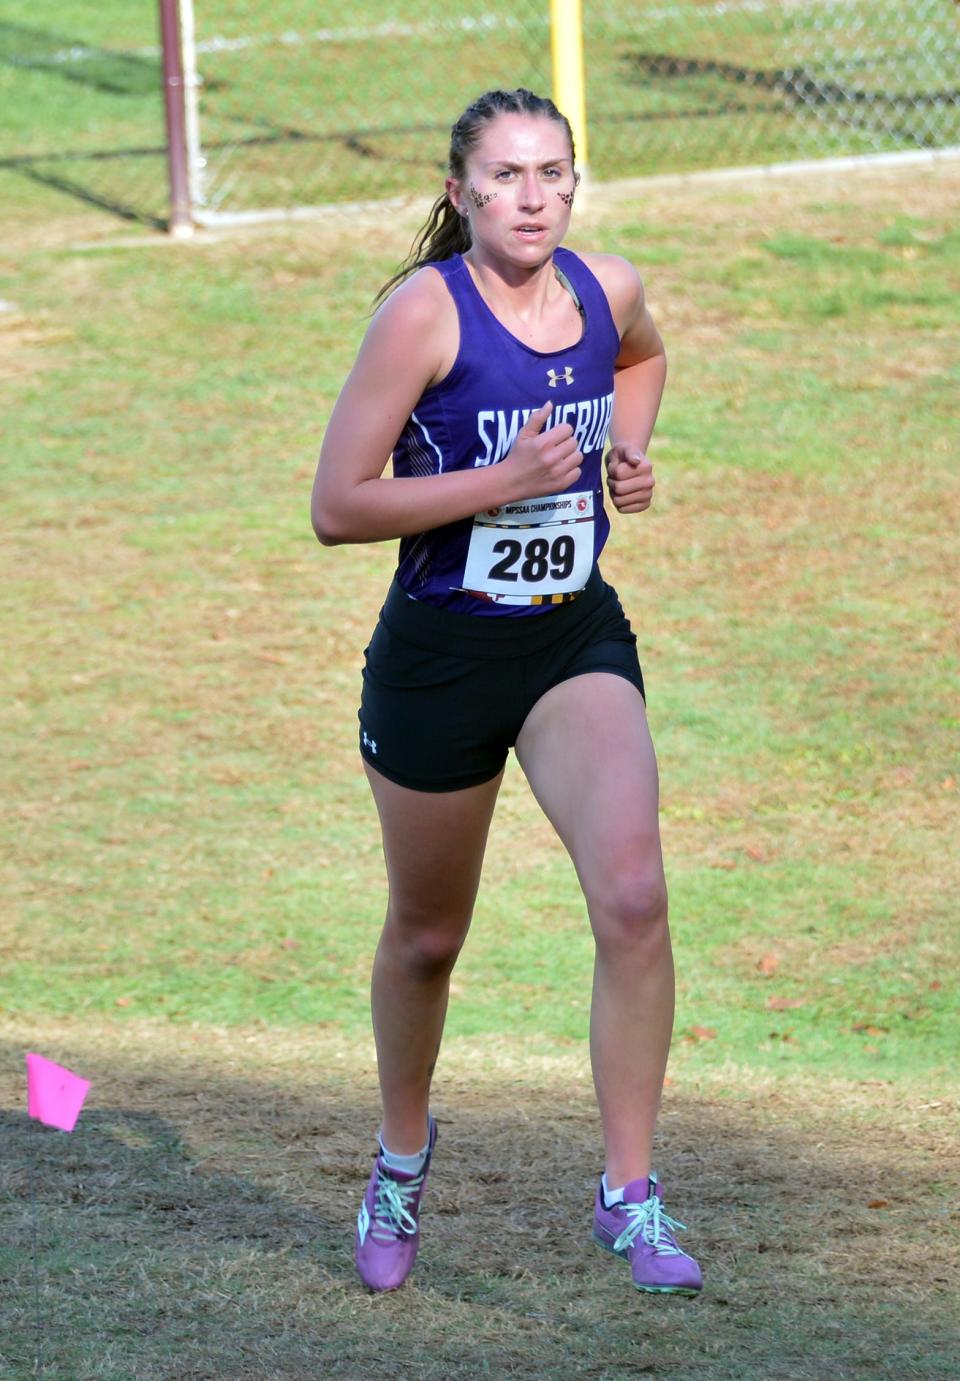 Smithsburg's Michaela Gross finished second in the Maryland Class 1A girls race in 20:16.96.